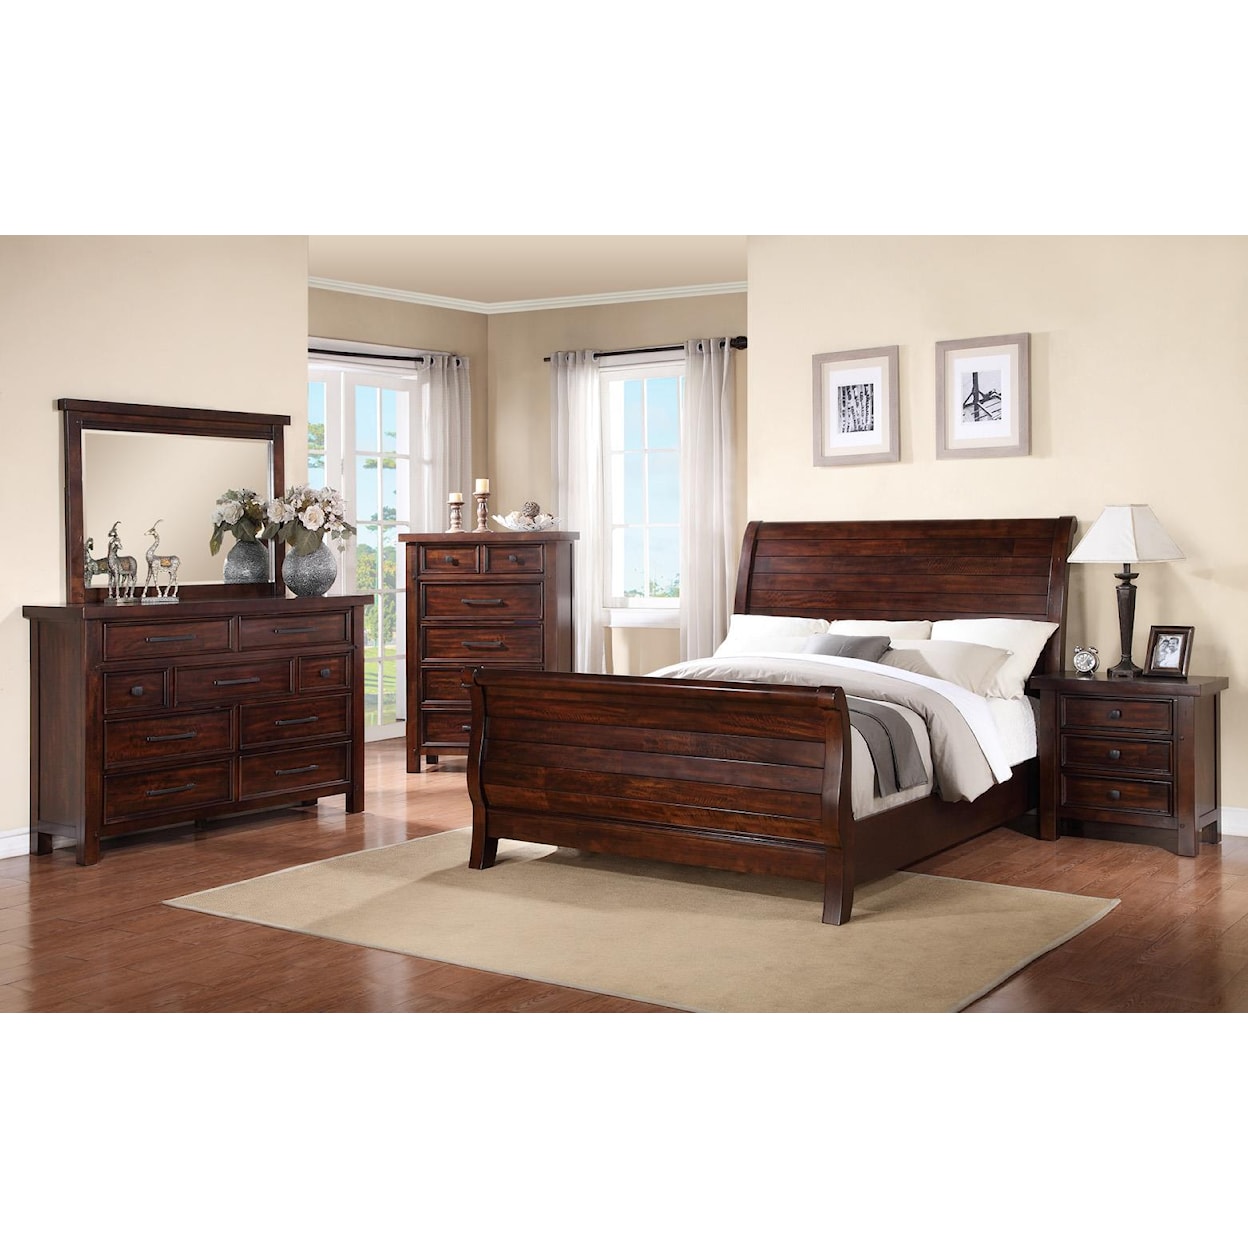 Holland House Sonoma Drawer Dresser and Mirror